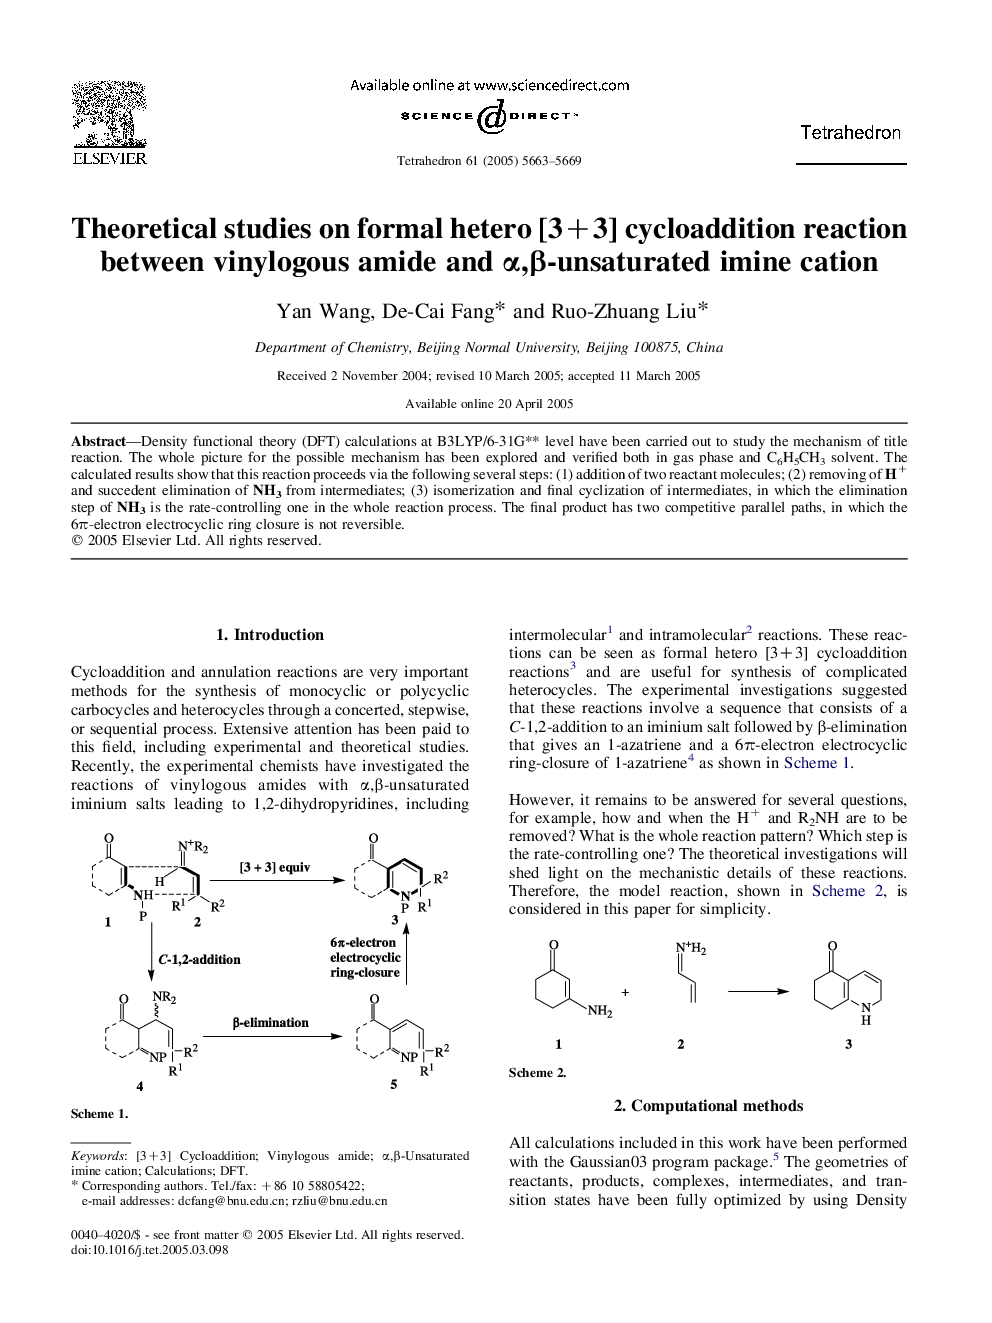 Theoretical studies on formal hetero [3+3] cycloaddition reaction between vinylogous amide and Î±,Î²-unsaturated imine cation